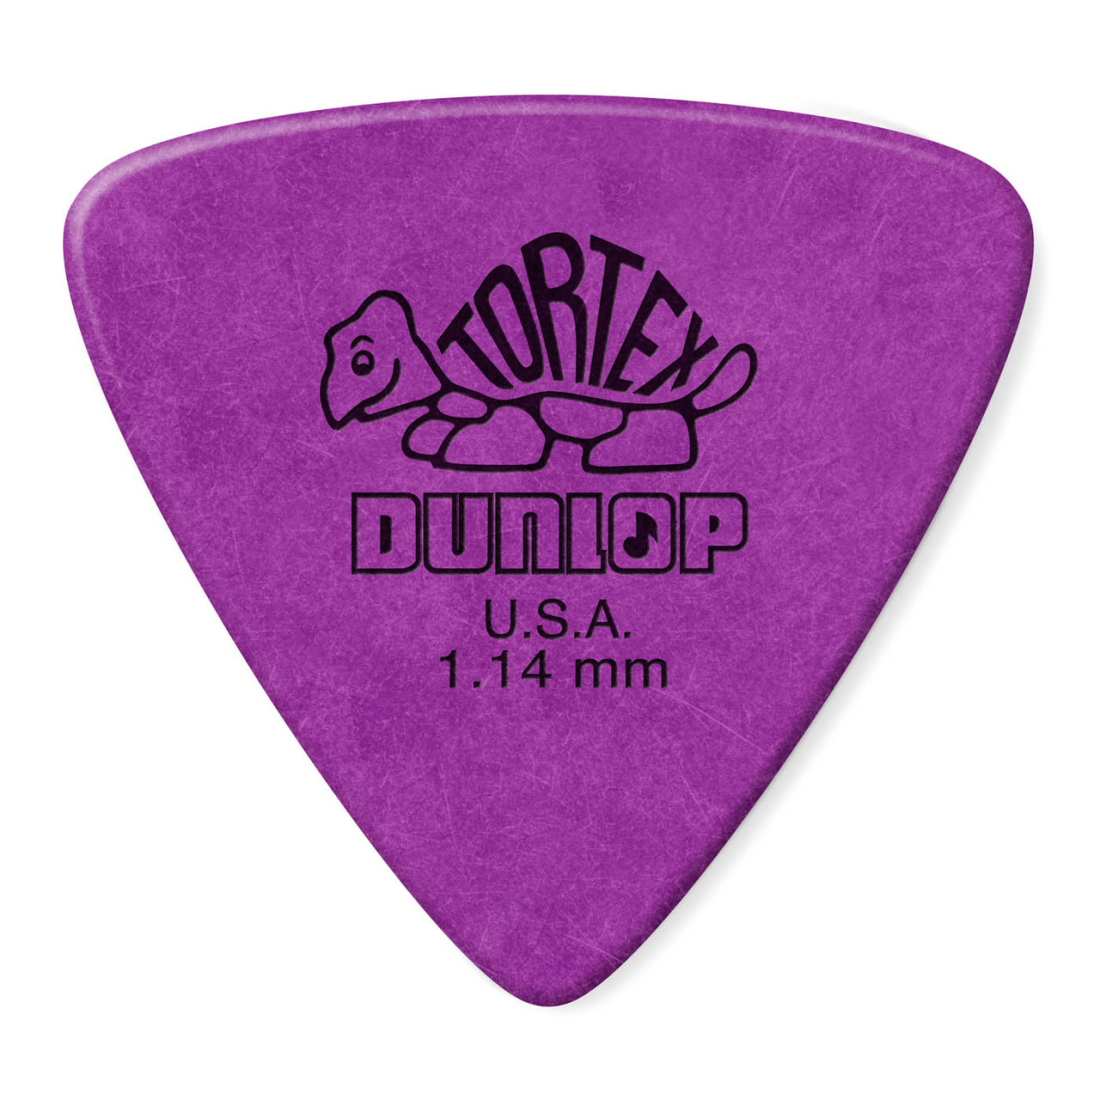 Tortex Triangle Player Pack (72 Pack) - 1.14mm